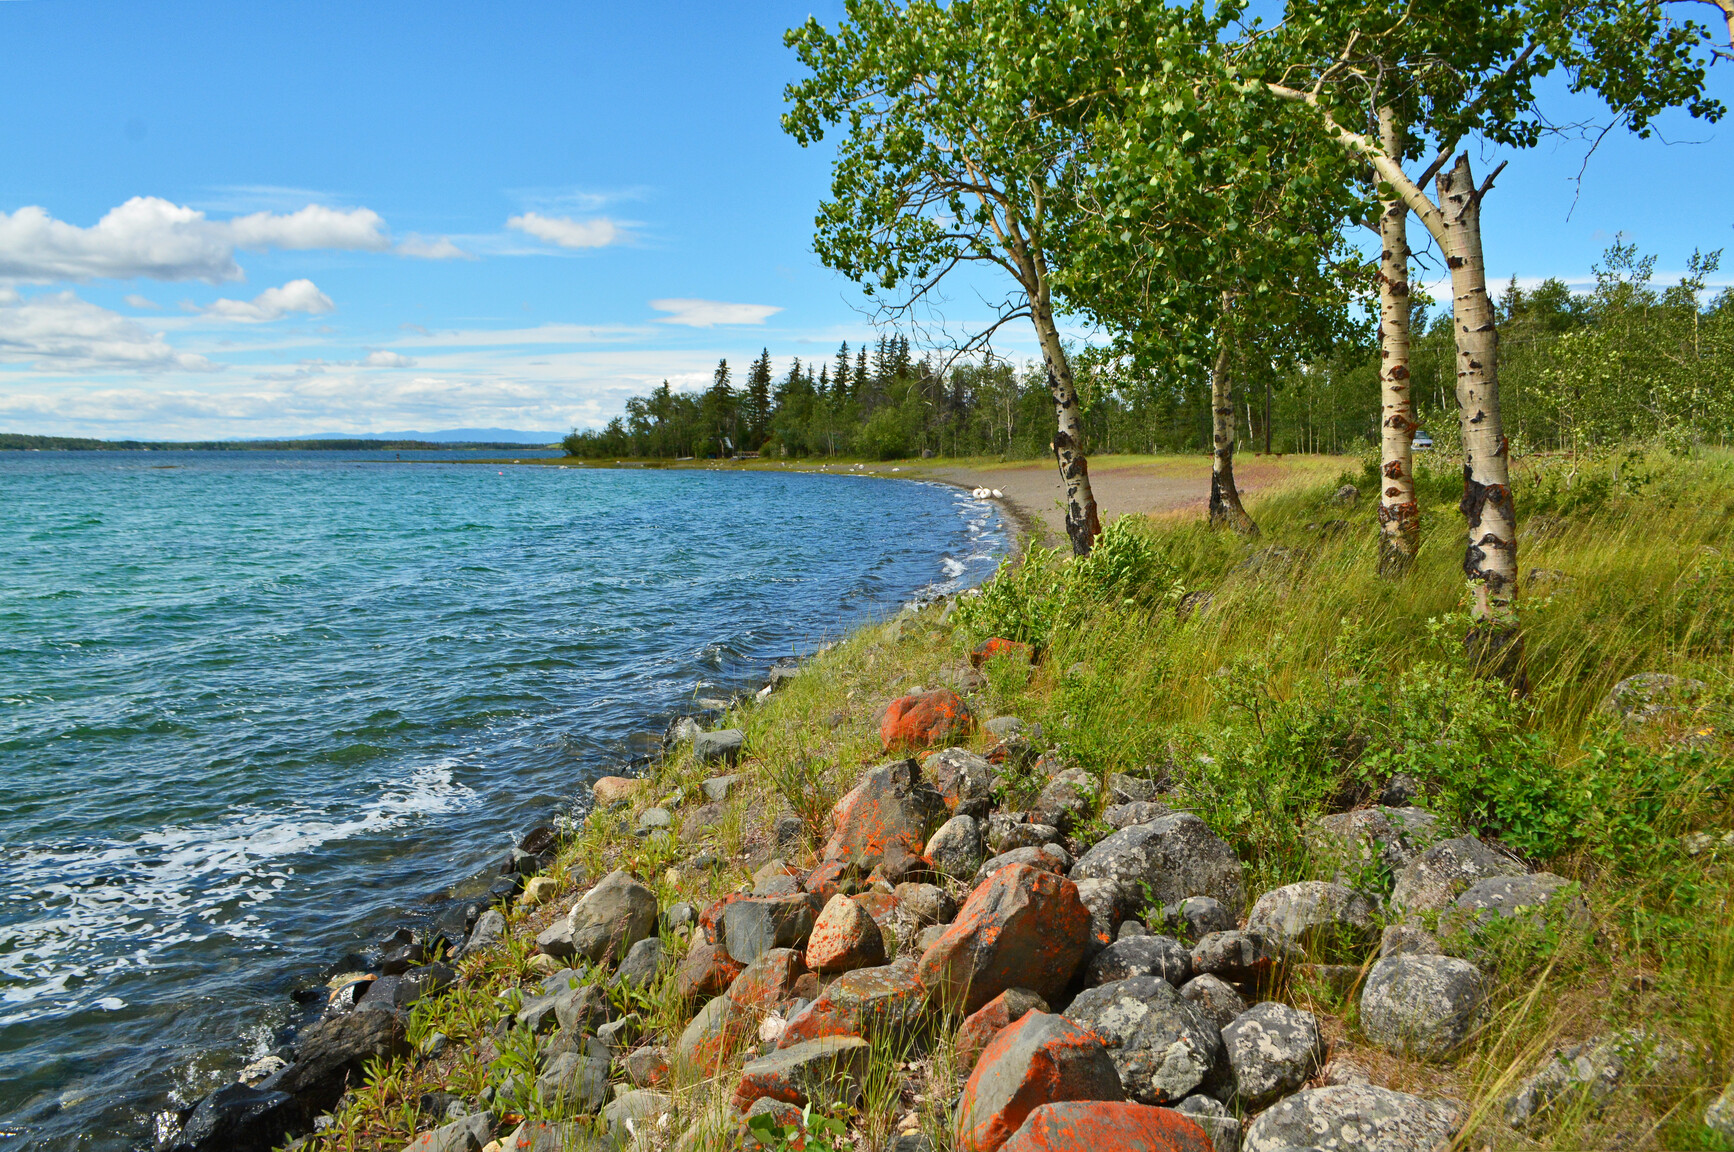 Little Arrowhead Site. View of lakeshore. On the shore are rocks with red lichen. In the background are forests and mountains.